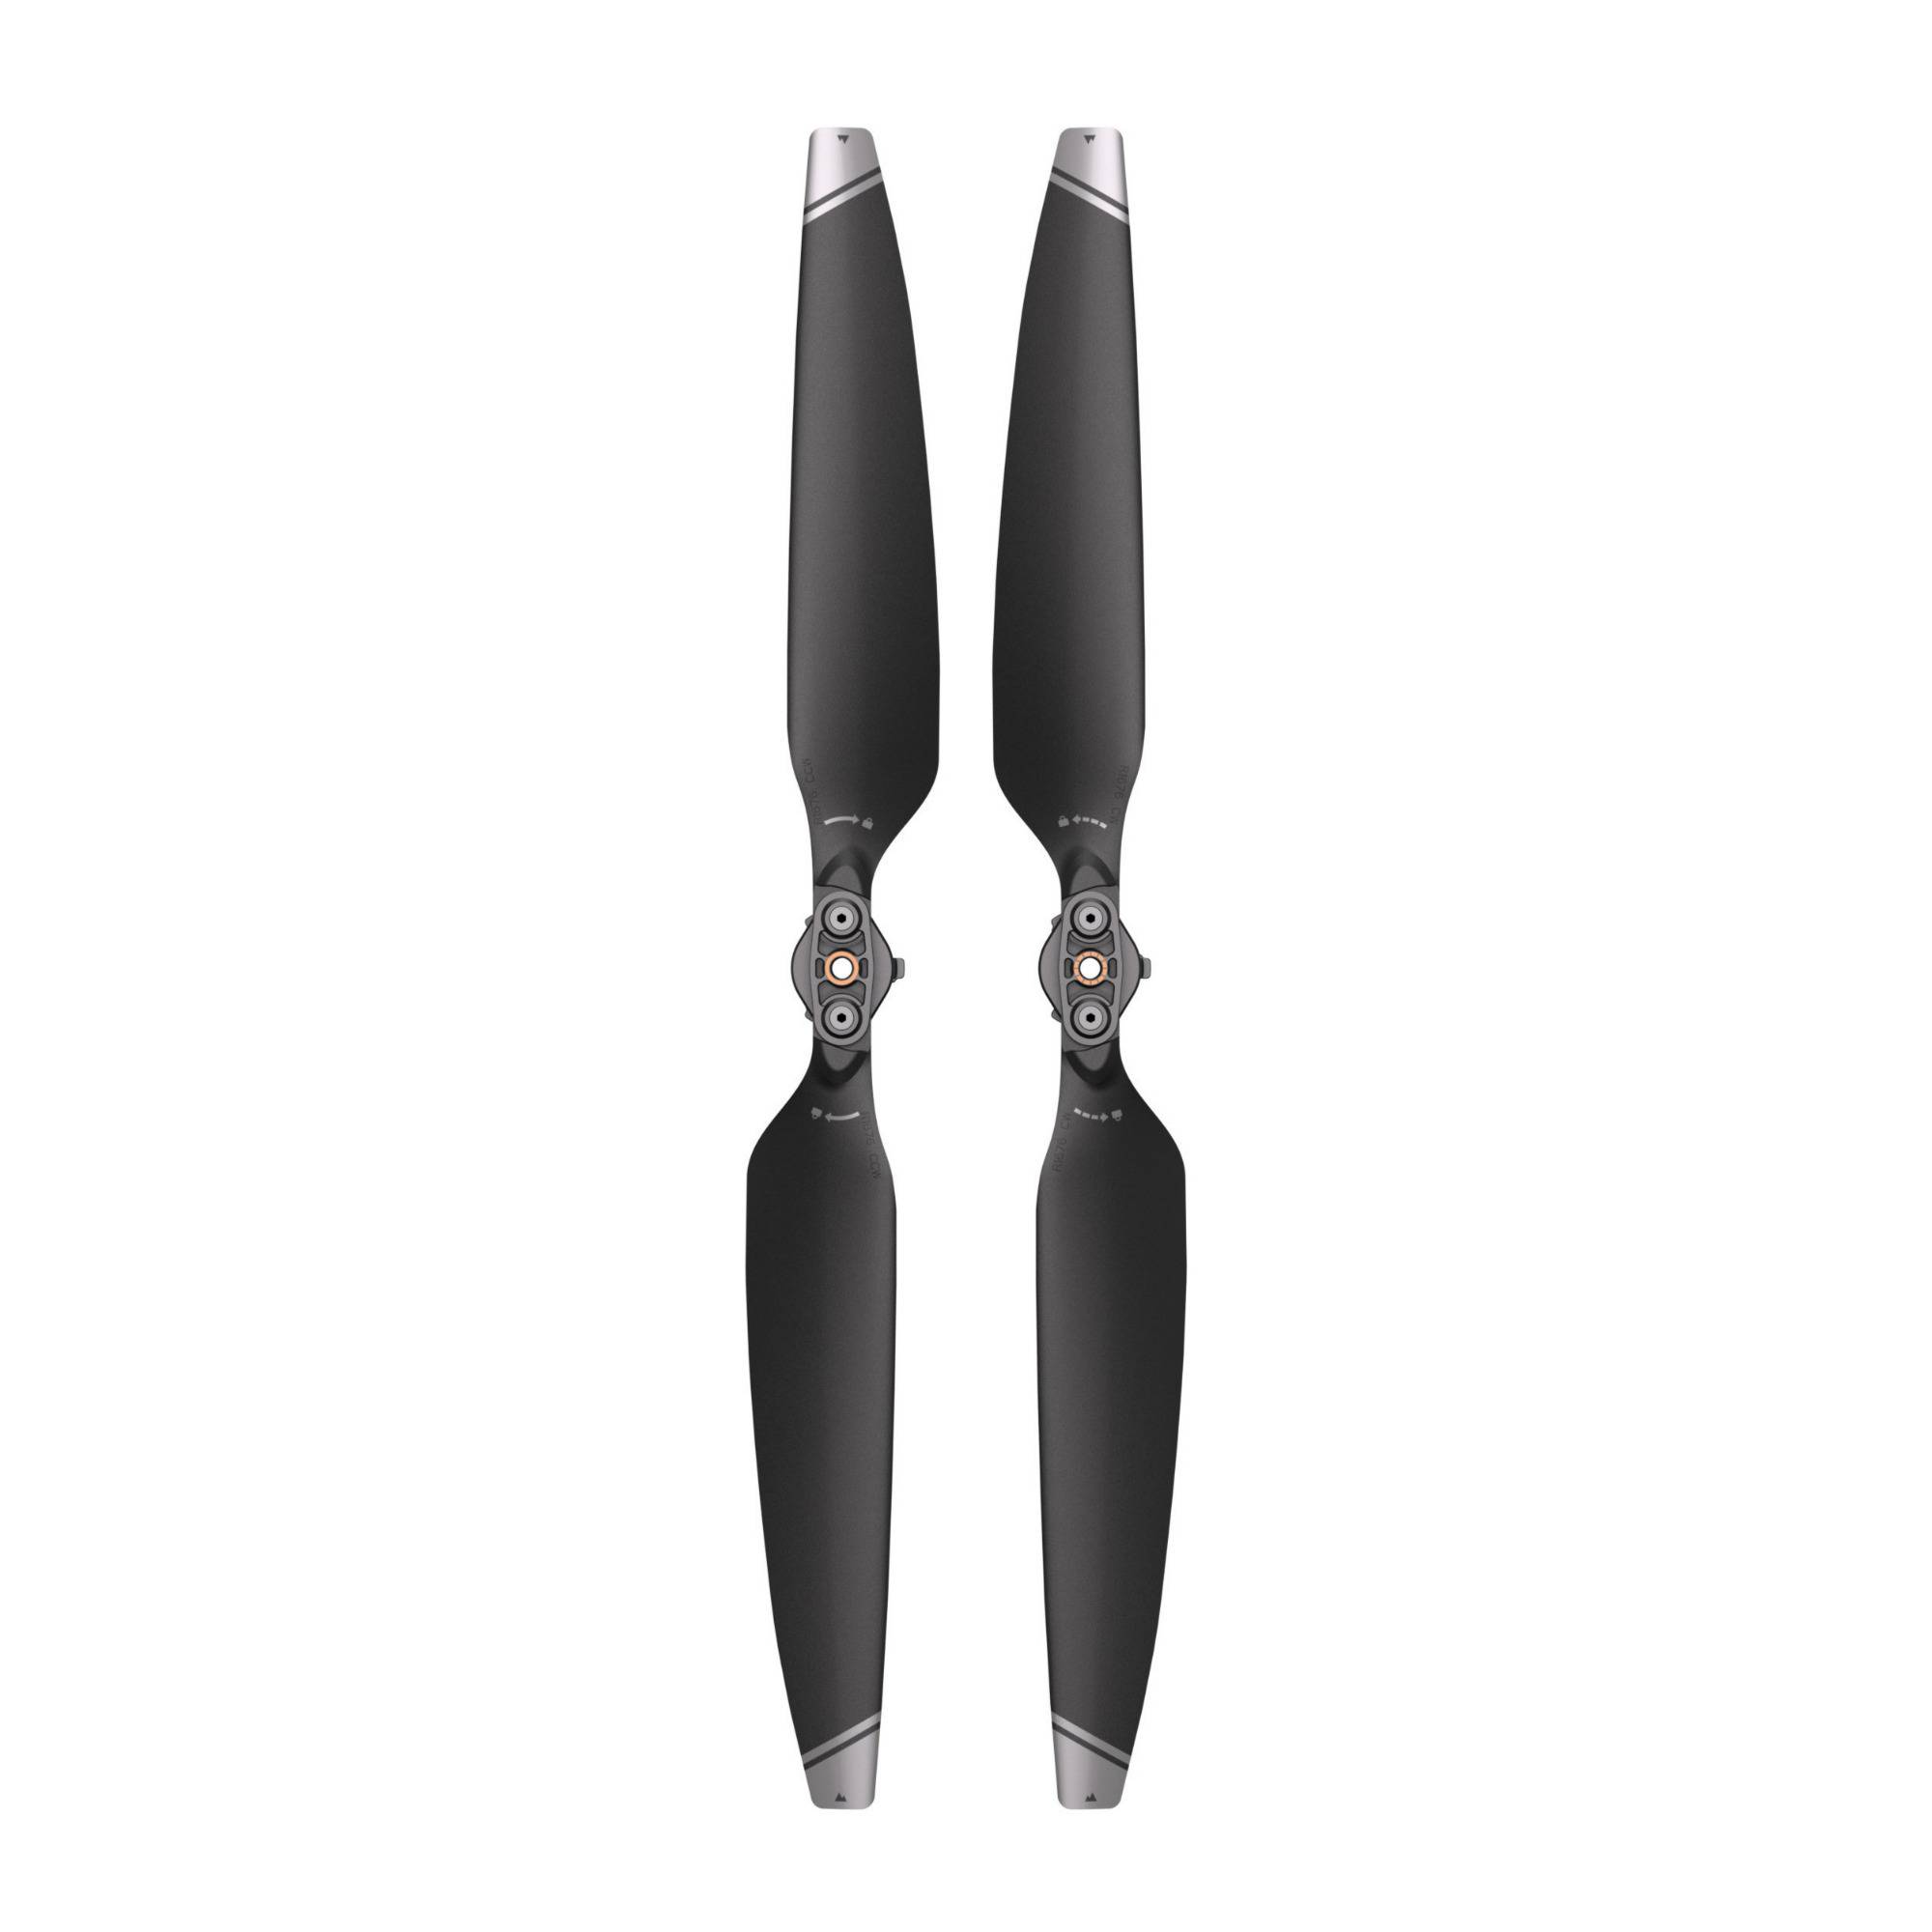 DJI 3,000 Meter High Altitude Use, Foldable and Easy Quick-Release Propellers (Pair)